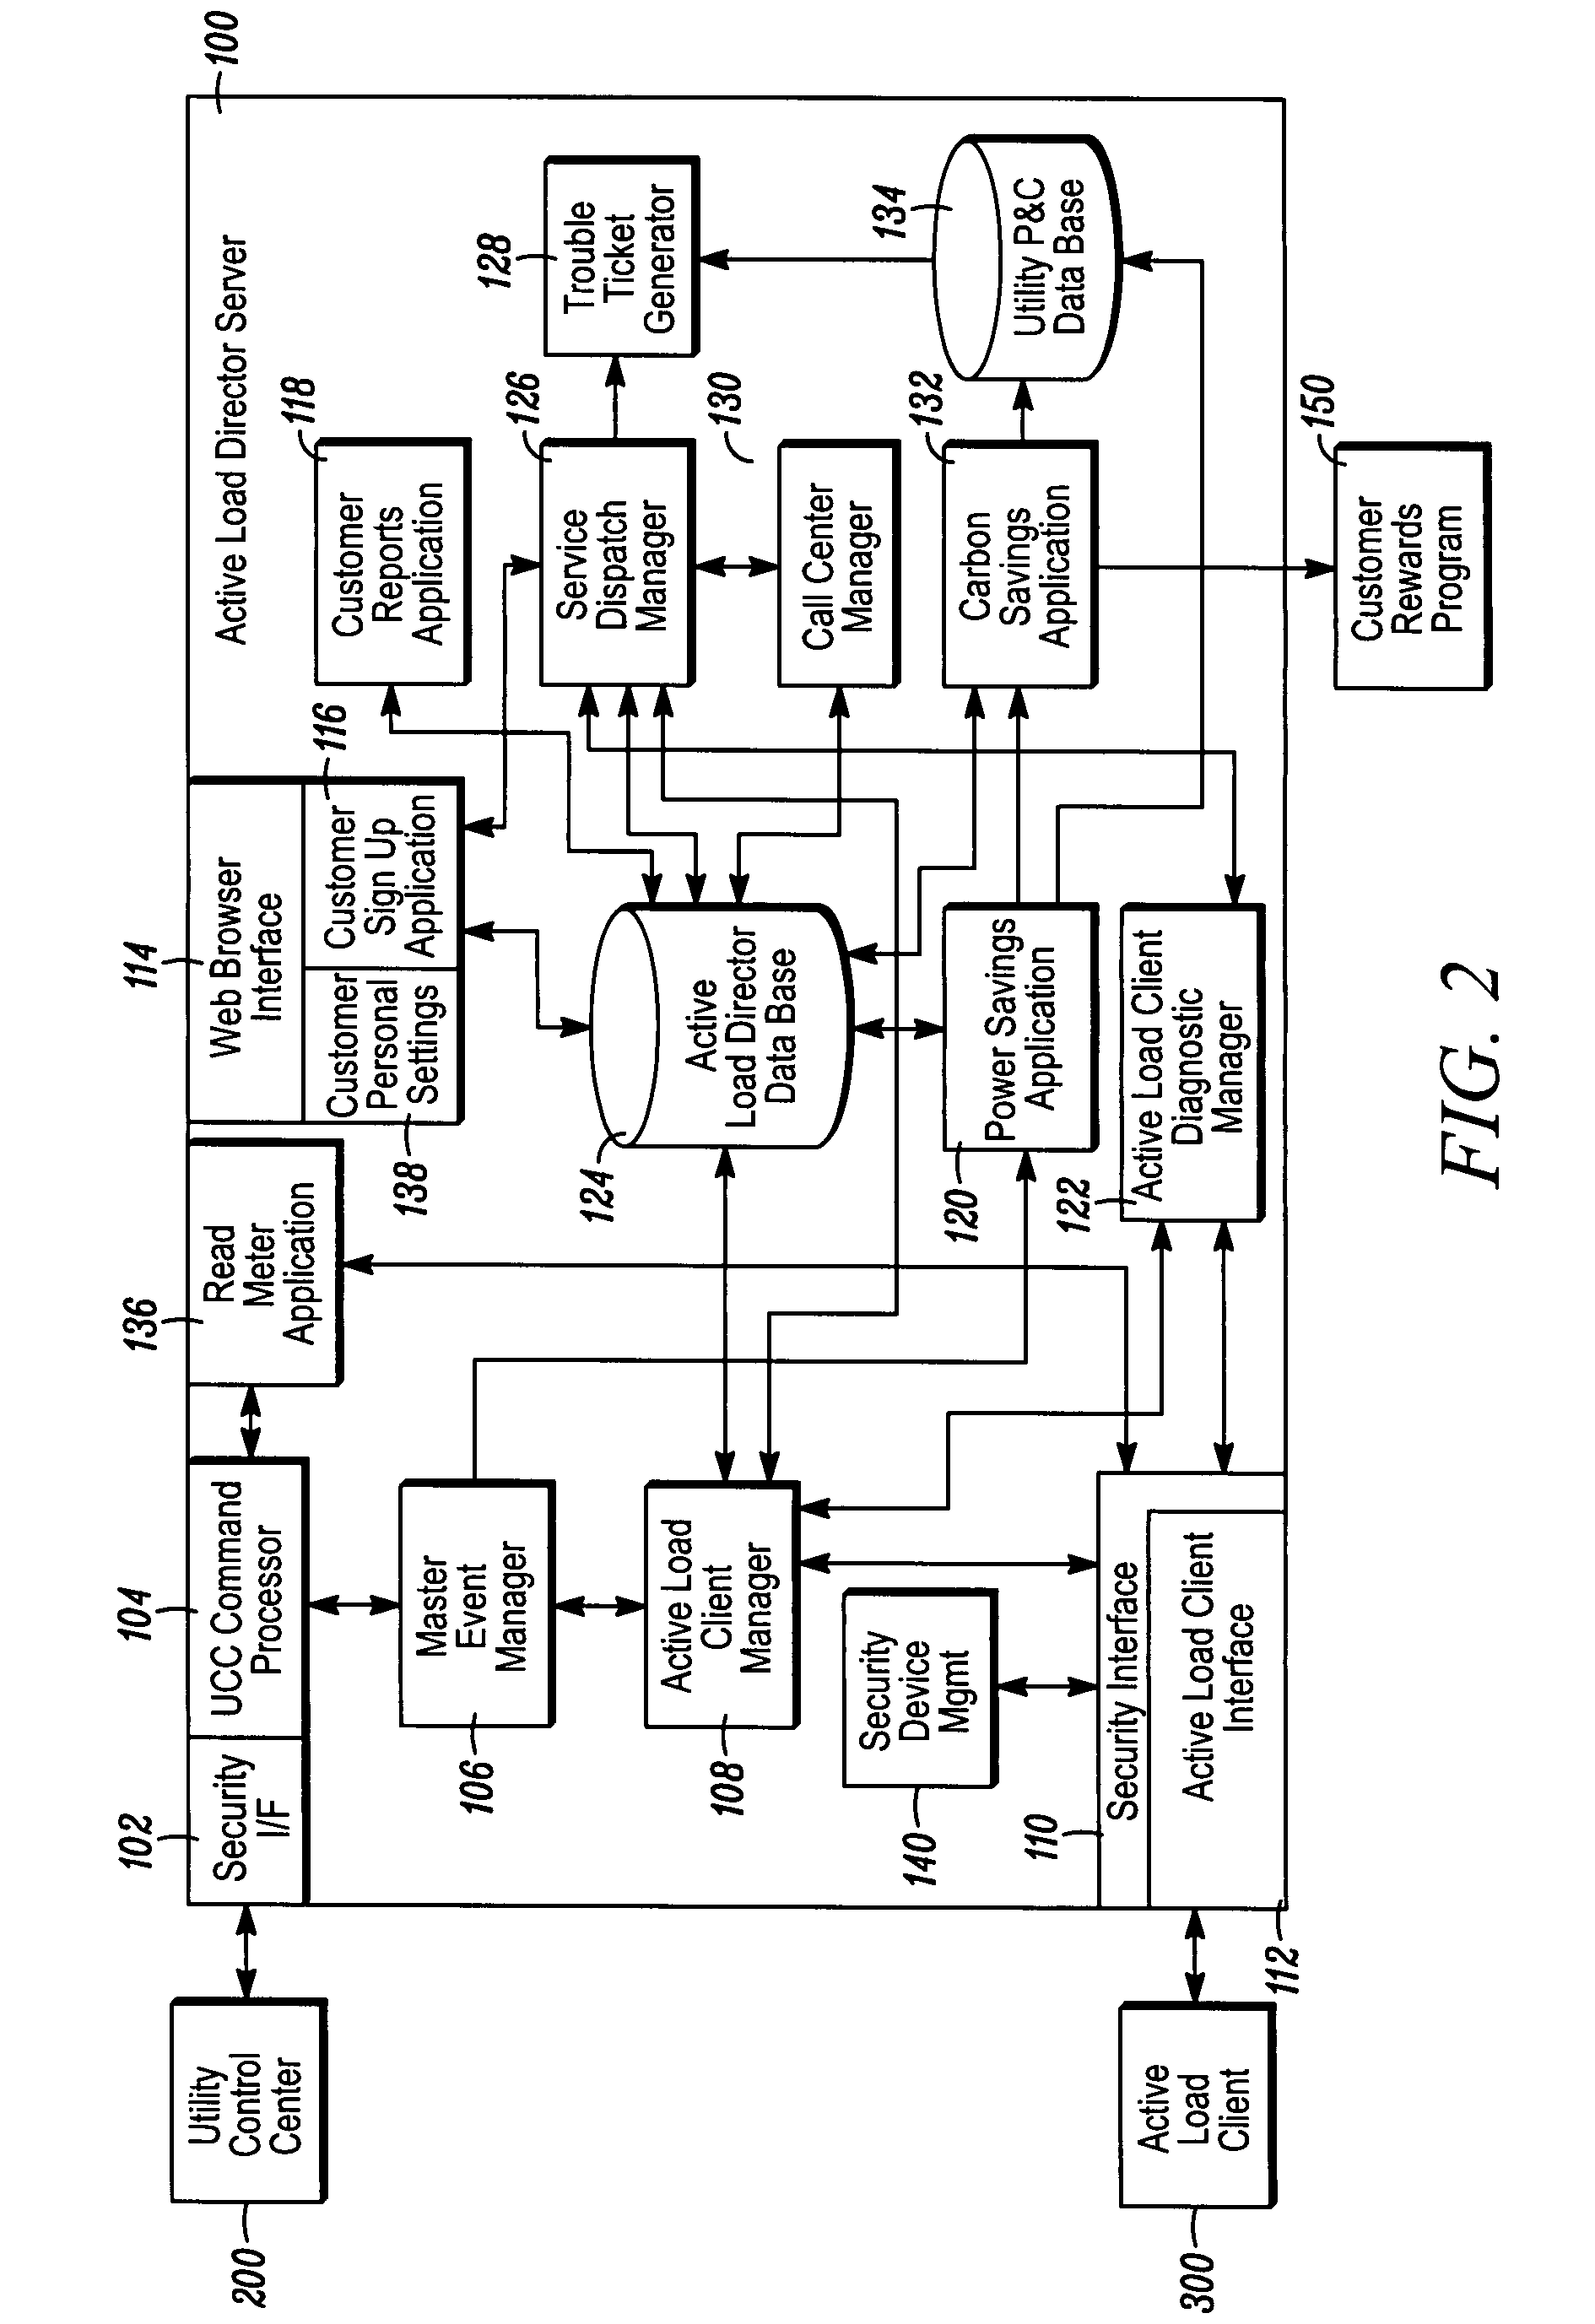 System and method for managing consumption of power supplied by an electric utility